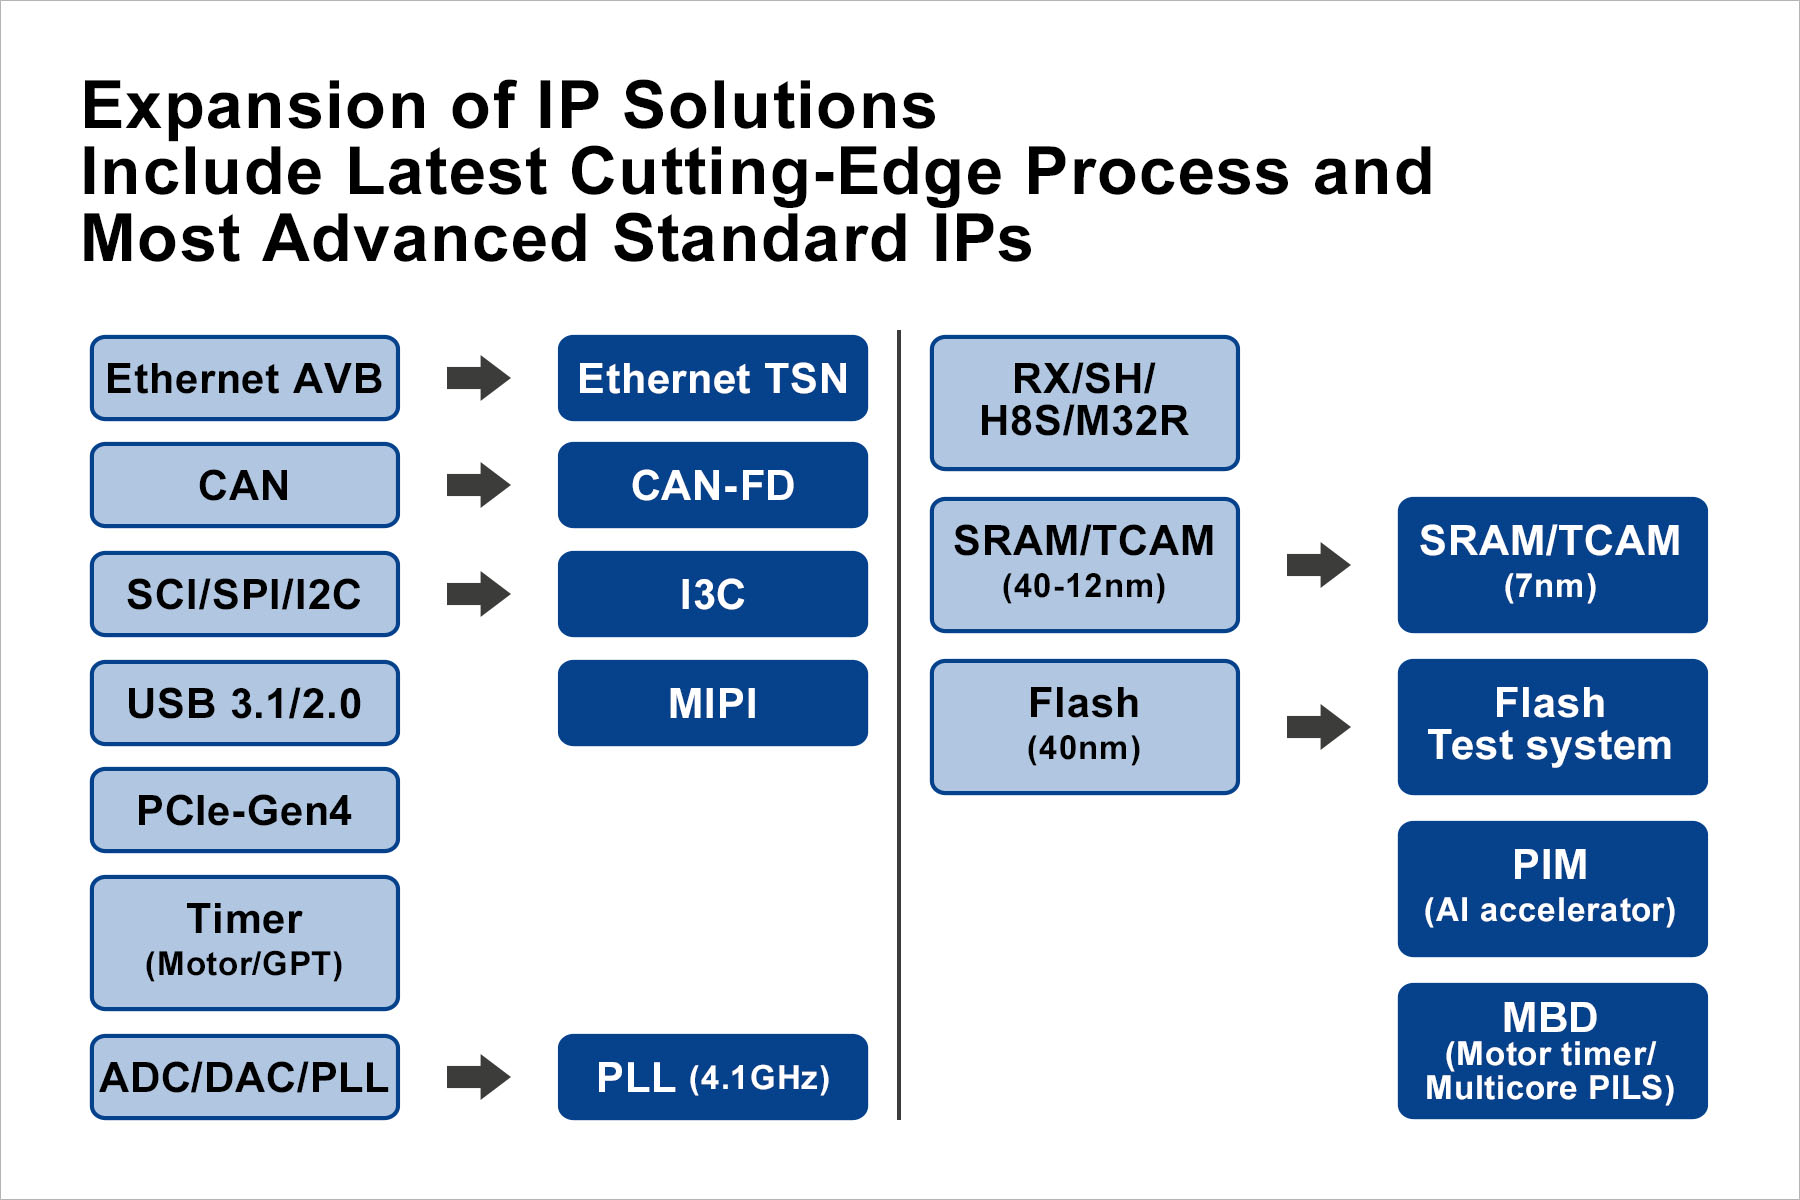 Renesas expands access to IP 